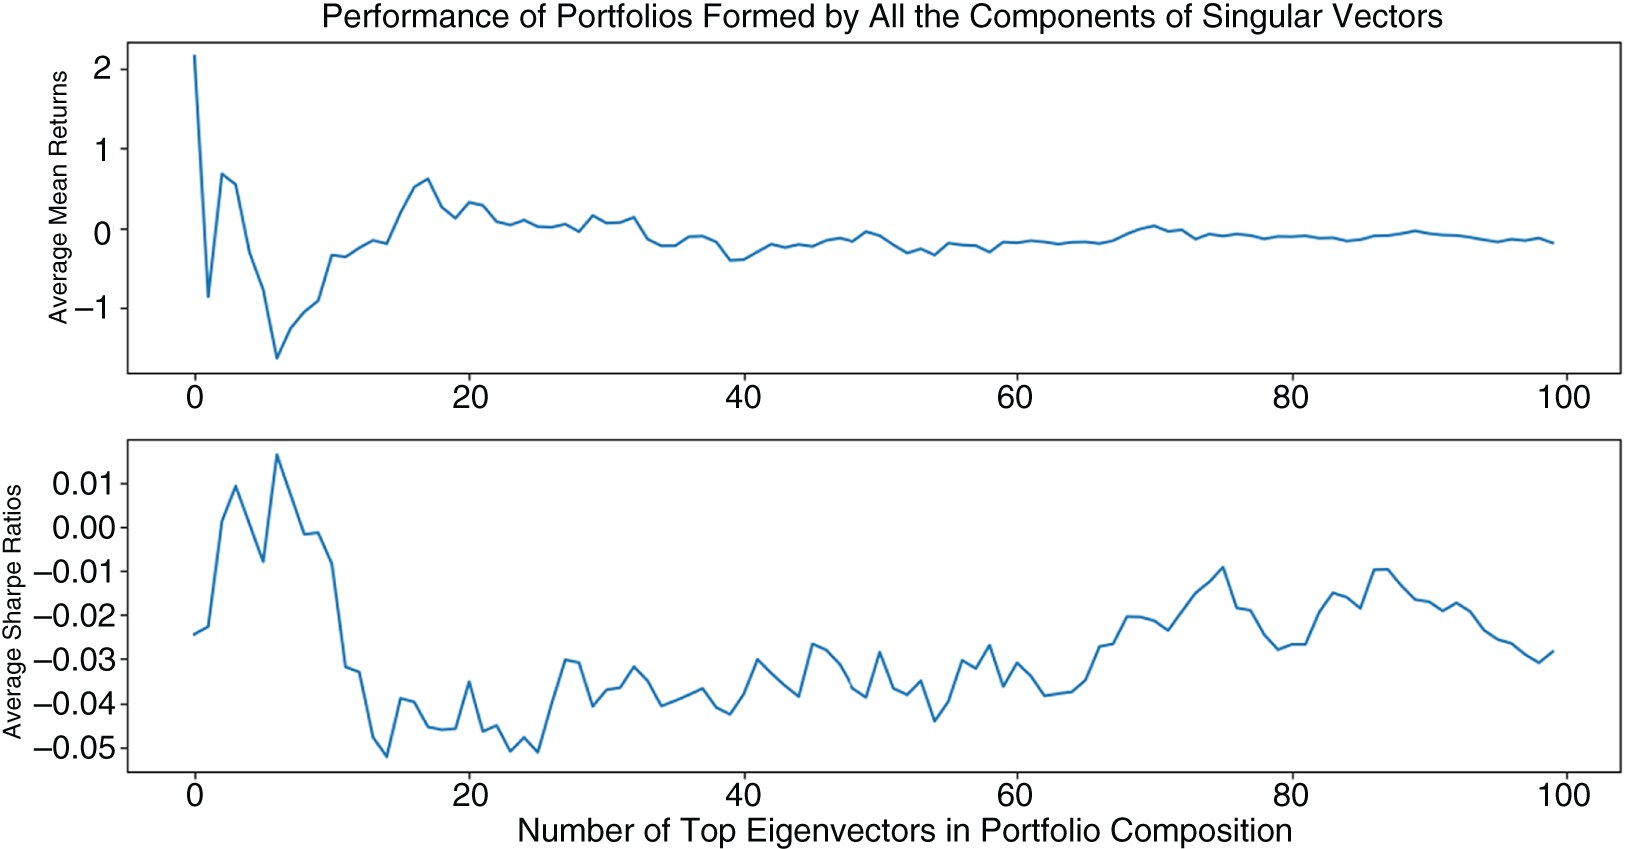 Graphs depict the average performance of 1,000 of positive and negative components of 1–100 singular vectors. Portfolios comprising securities weighted by the coefficients of 3 and 4 singular vectors outperform the rest as measured by both the average mean return and the mean Sharpe ratio of the 1,000 random portfolios under consideration. After the fourth singular vector, the portfolio performance drops off sharply in either the mean return, mean Sharpe ratio, or both.